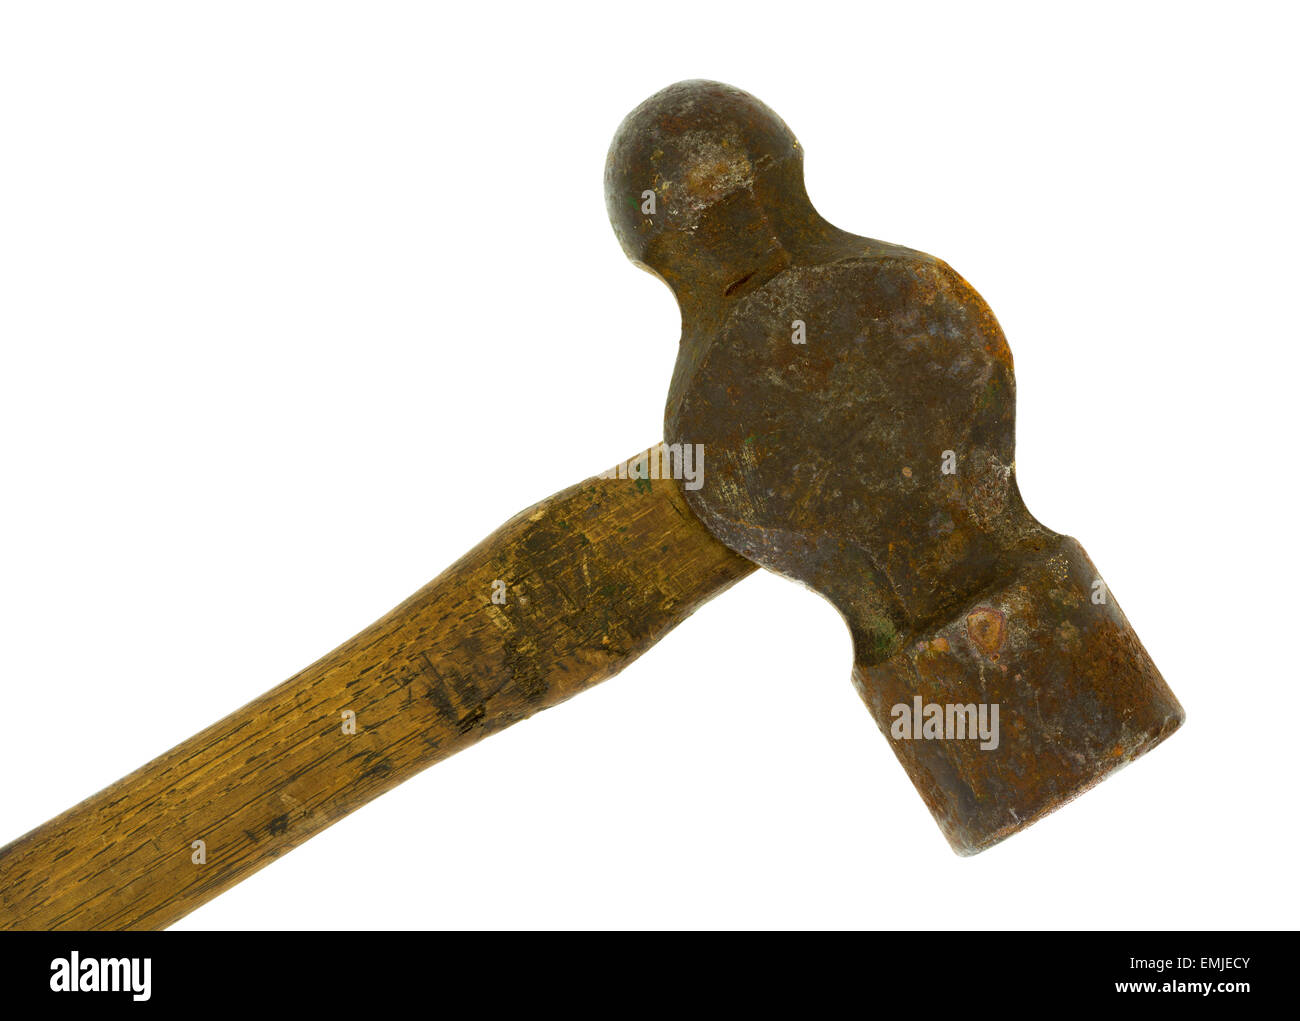 Close view of the head of a ball-peen hammer on a white background. Stock Photo